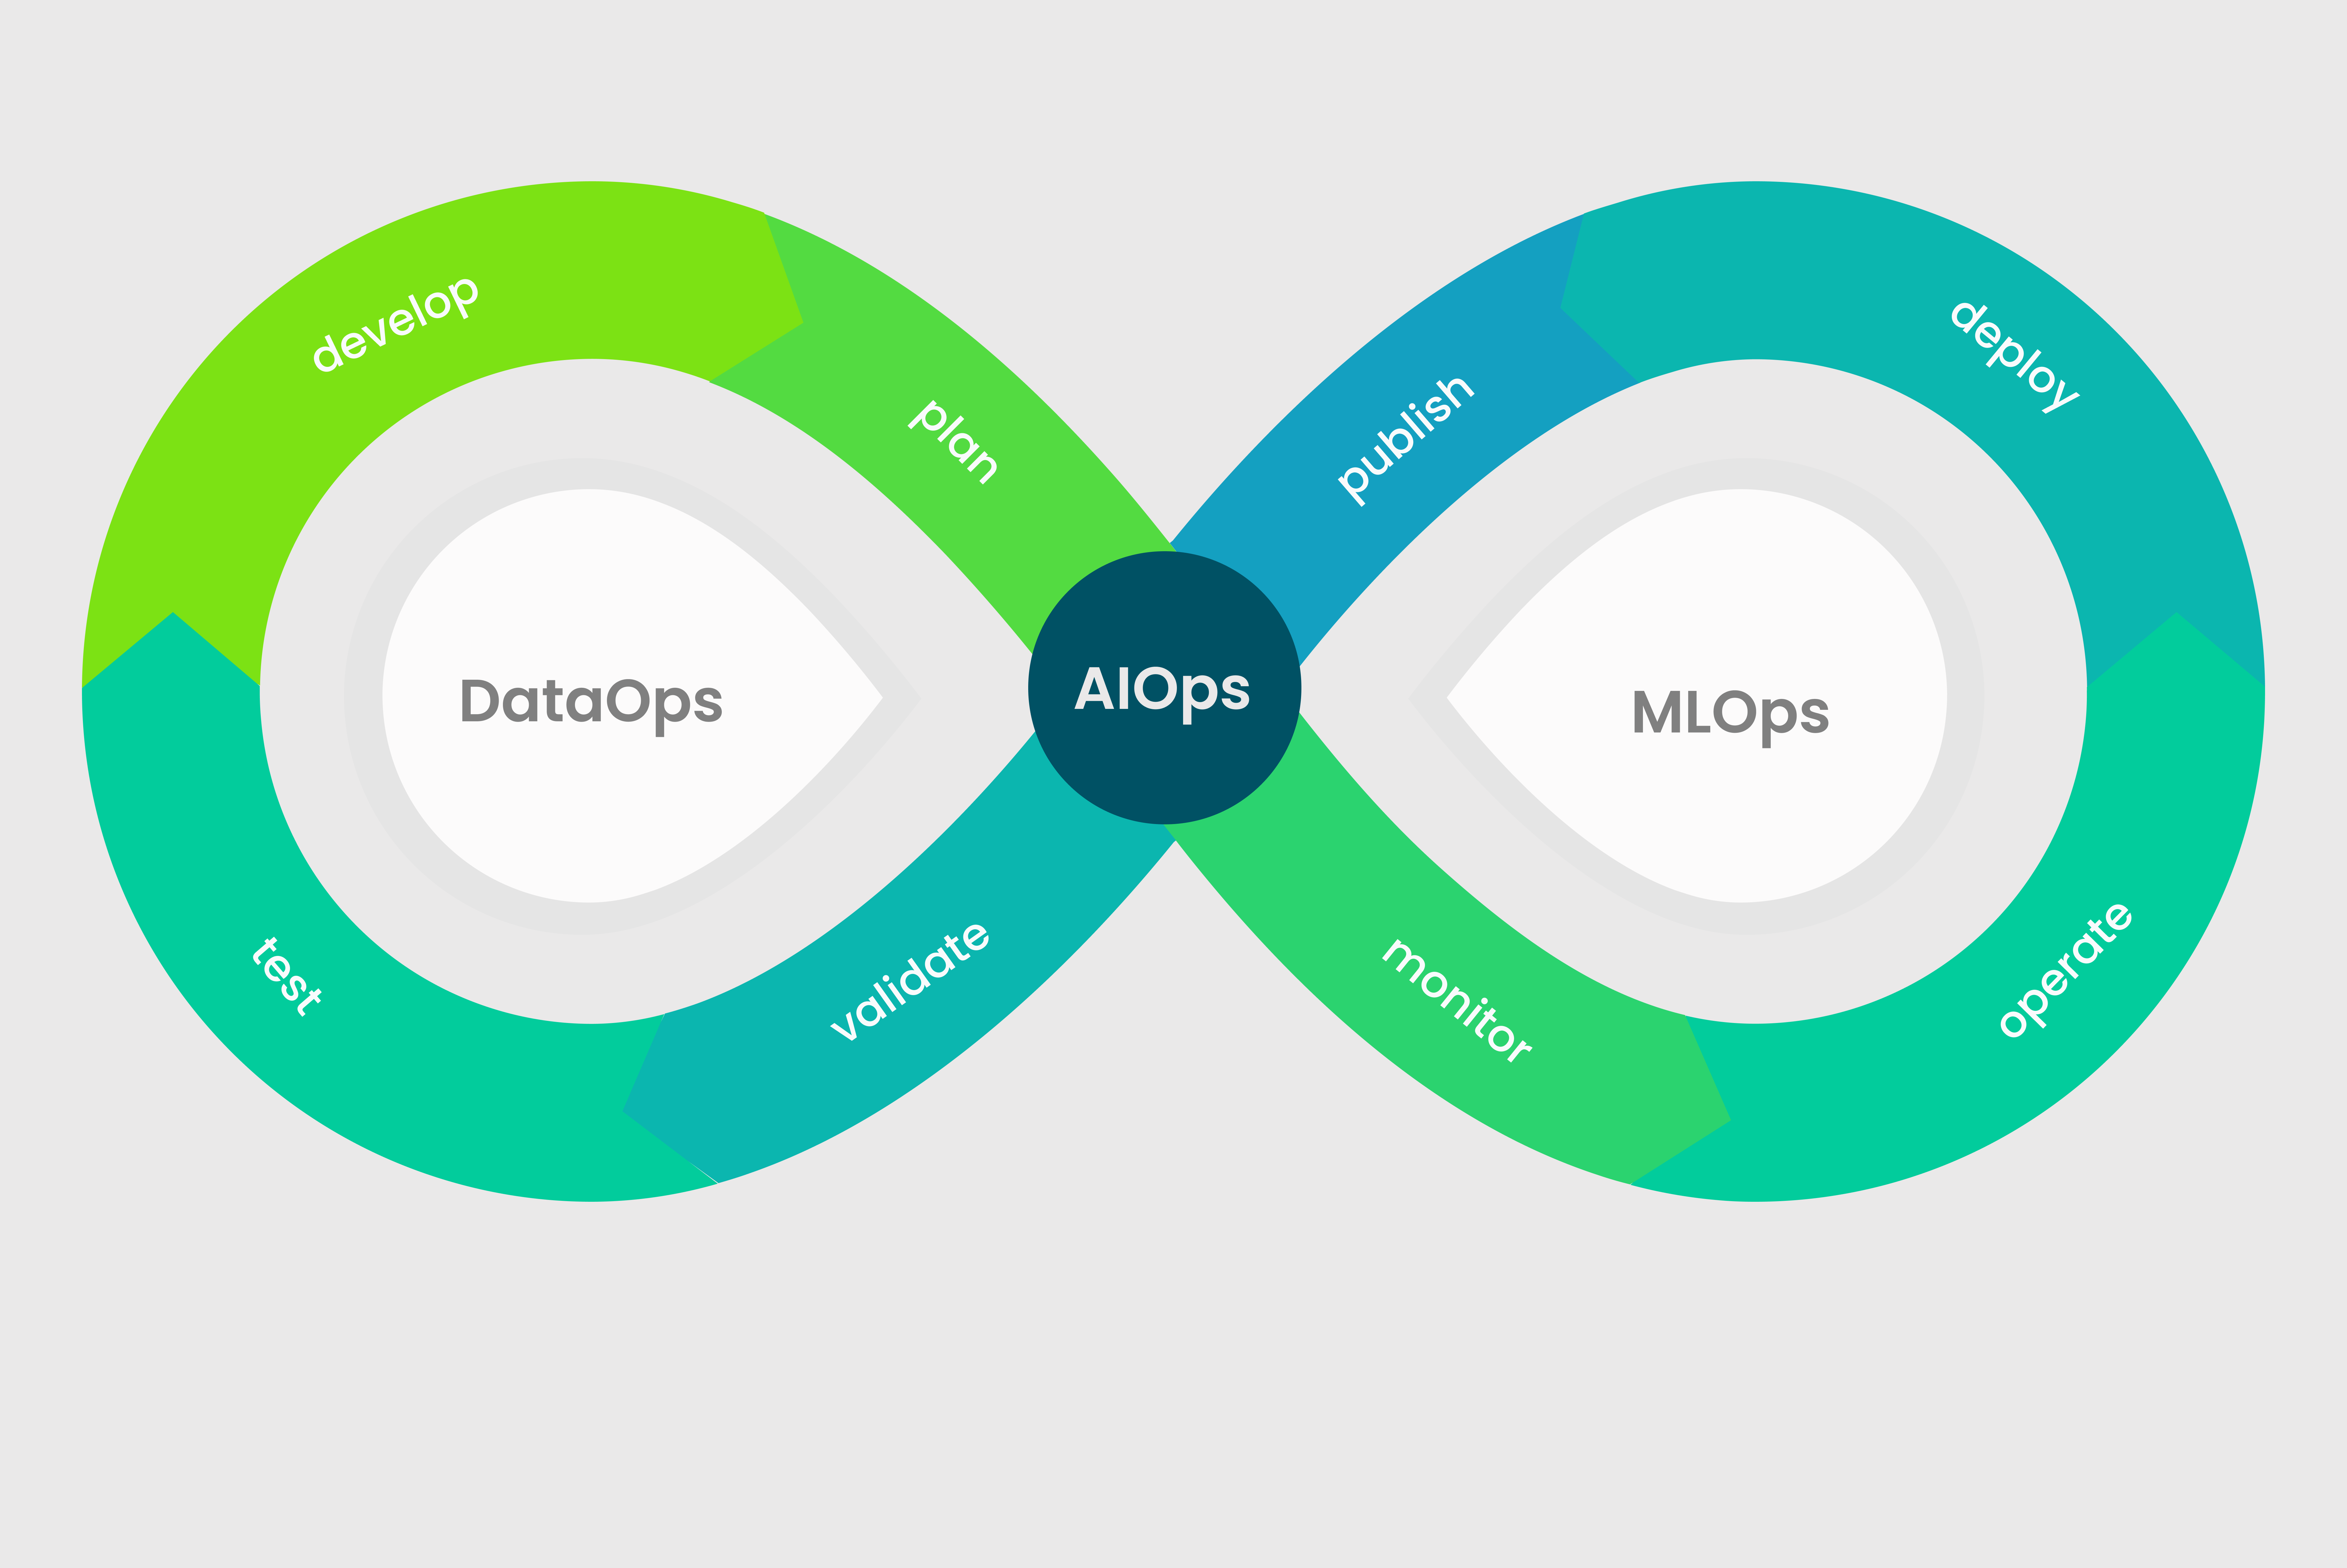 DataOps, MLOps, and AIOps